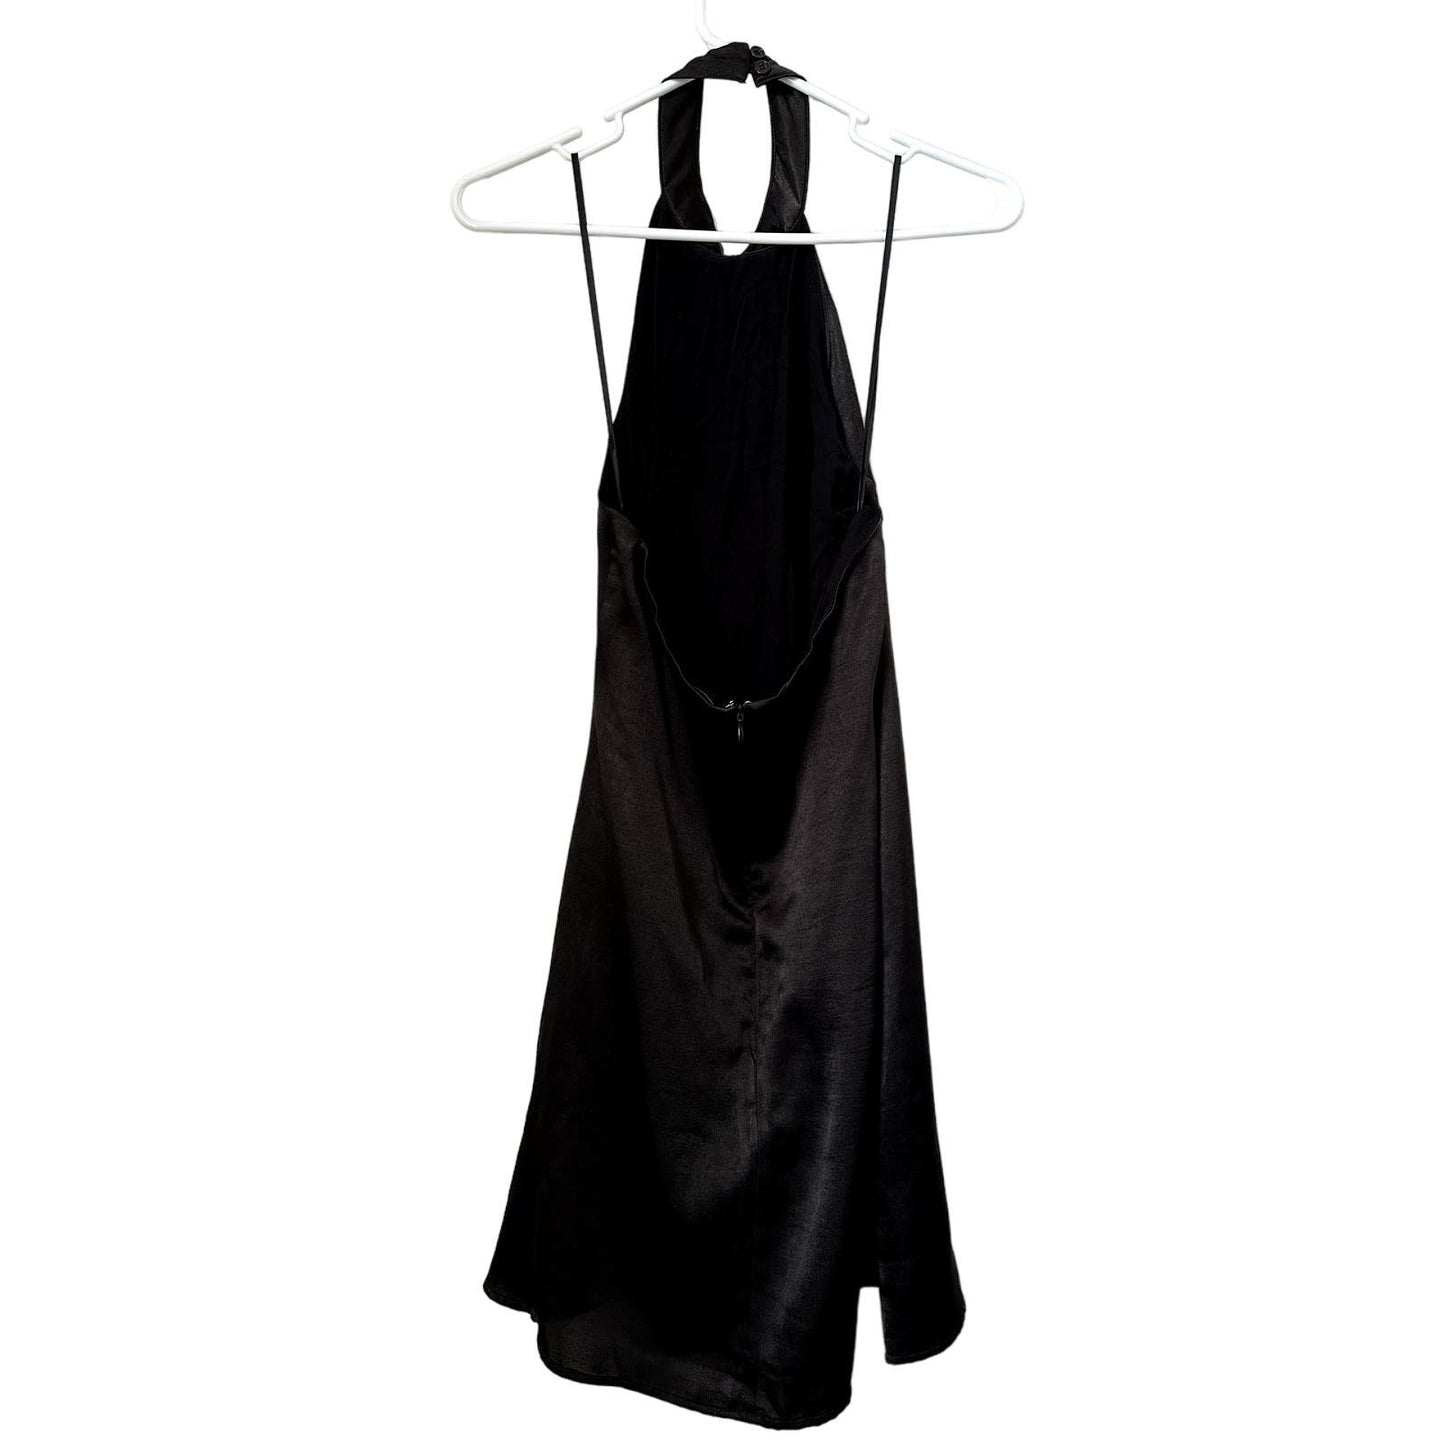 Urban Outfitters Black Satin Slip Dress, Size S